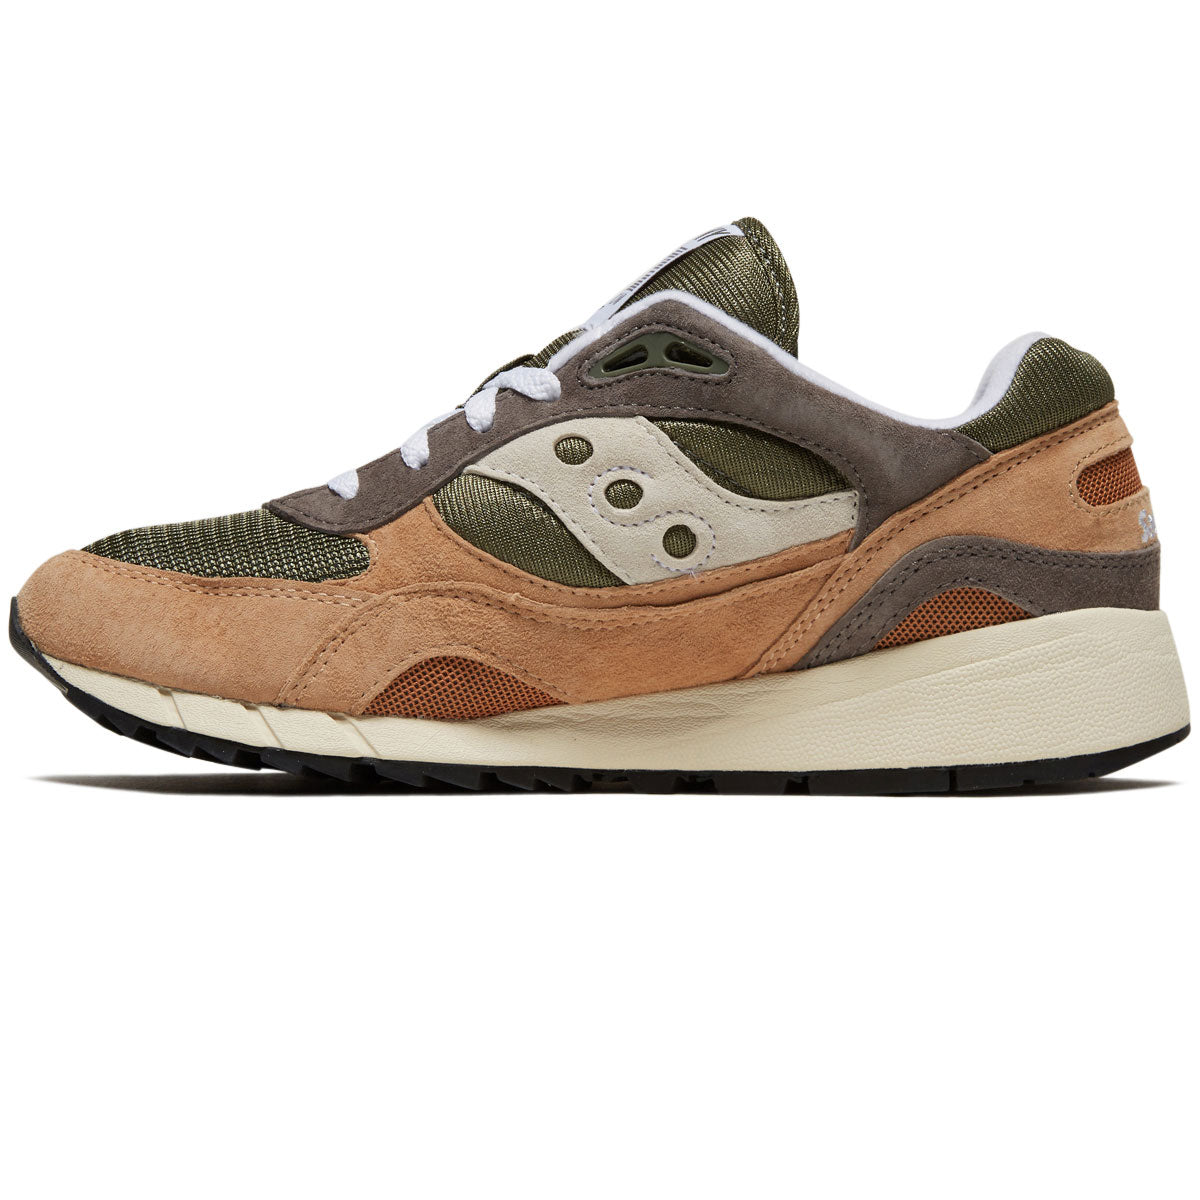 Saucony Shadow 6000 Shoes - Green/Brown image 2